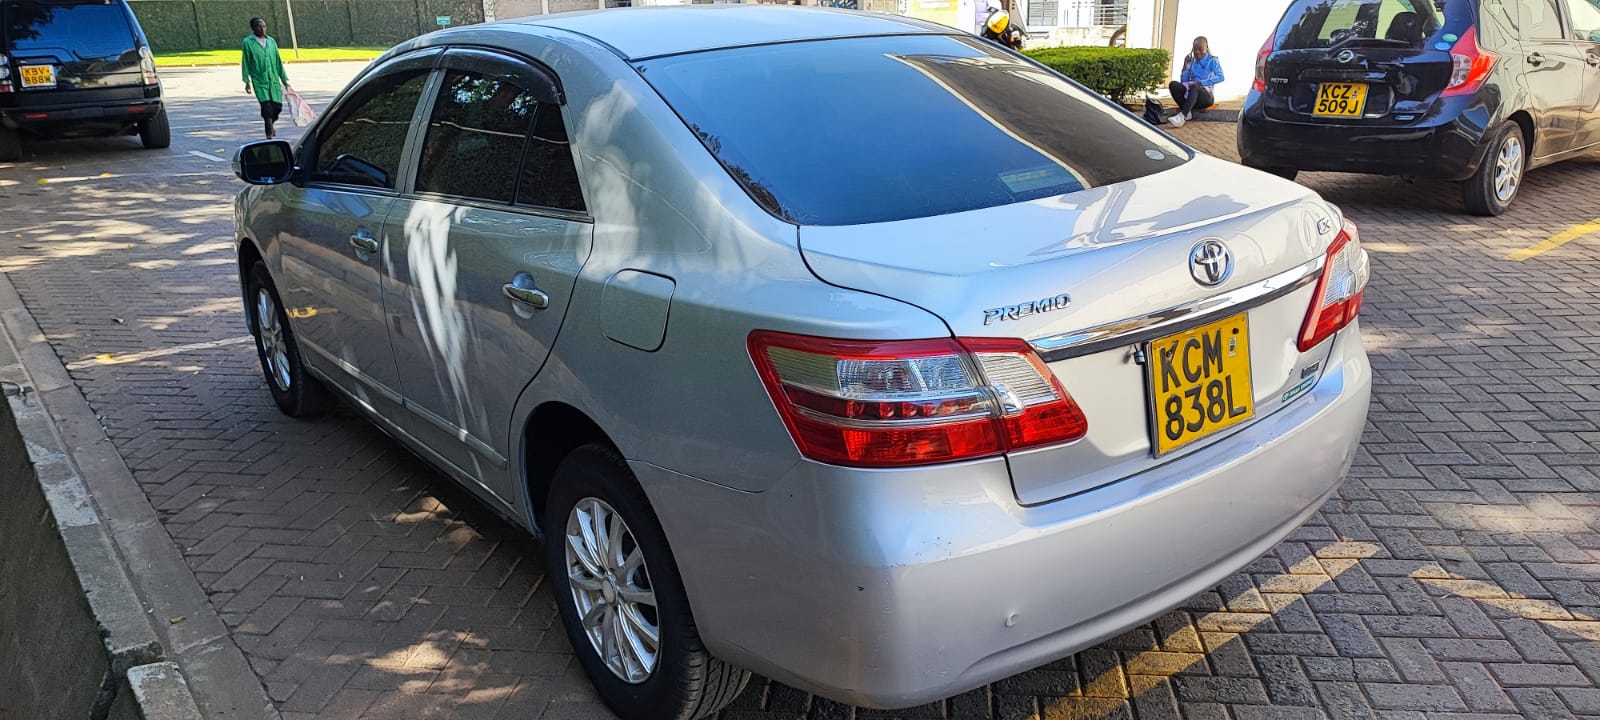 Toyota PREMIO QUICK SALE Pay 30% Deposit Trade in Ok Hot Deal